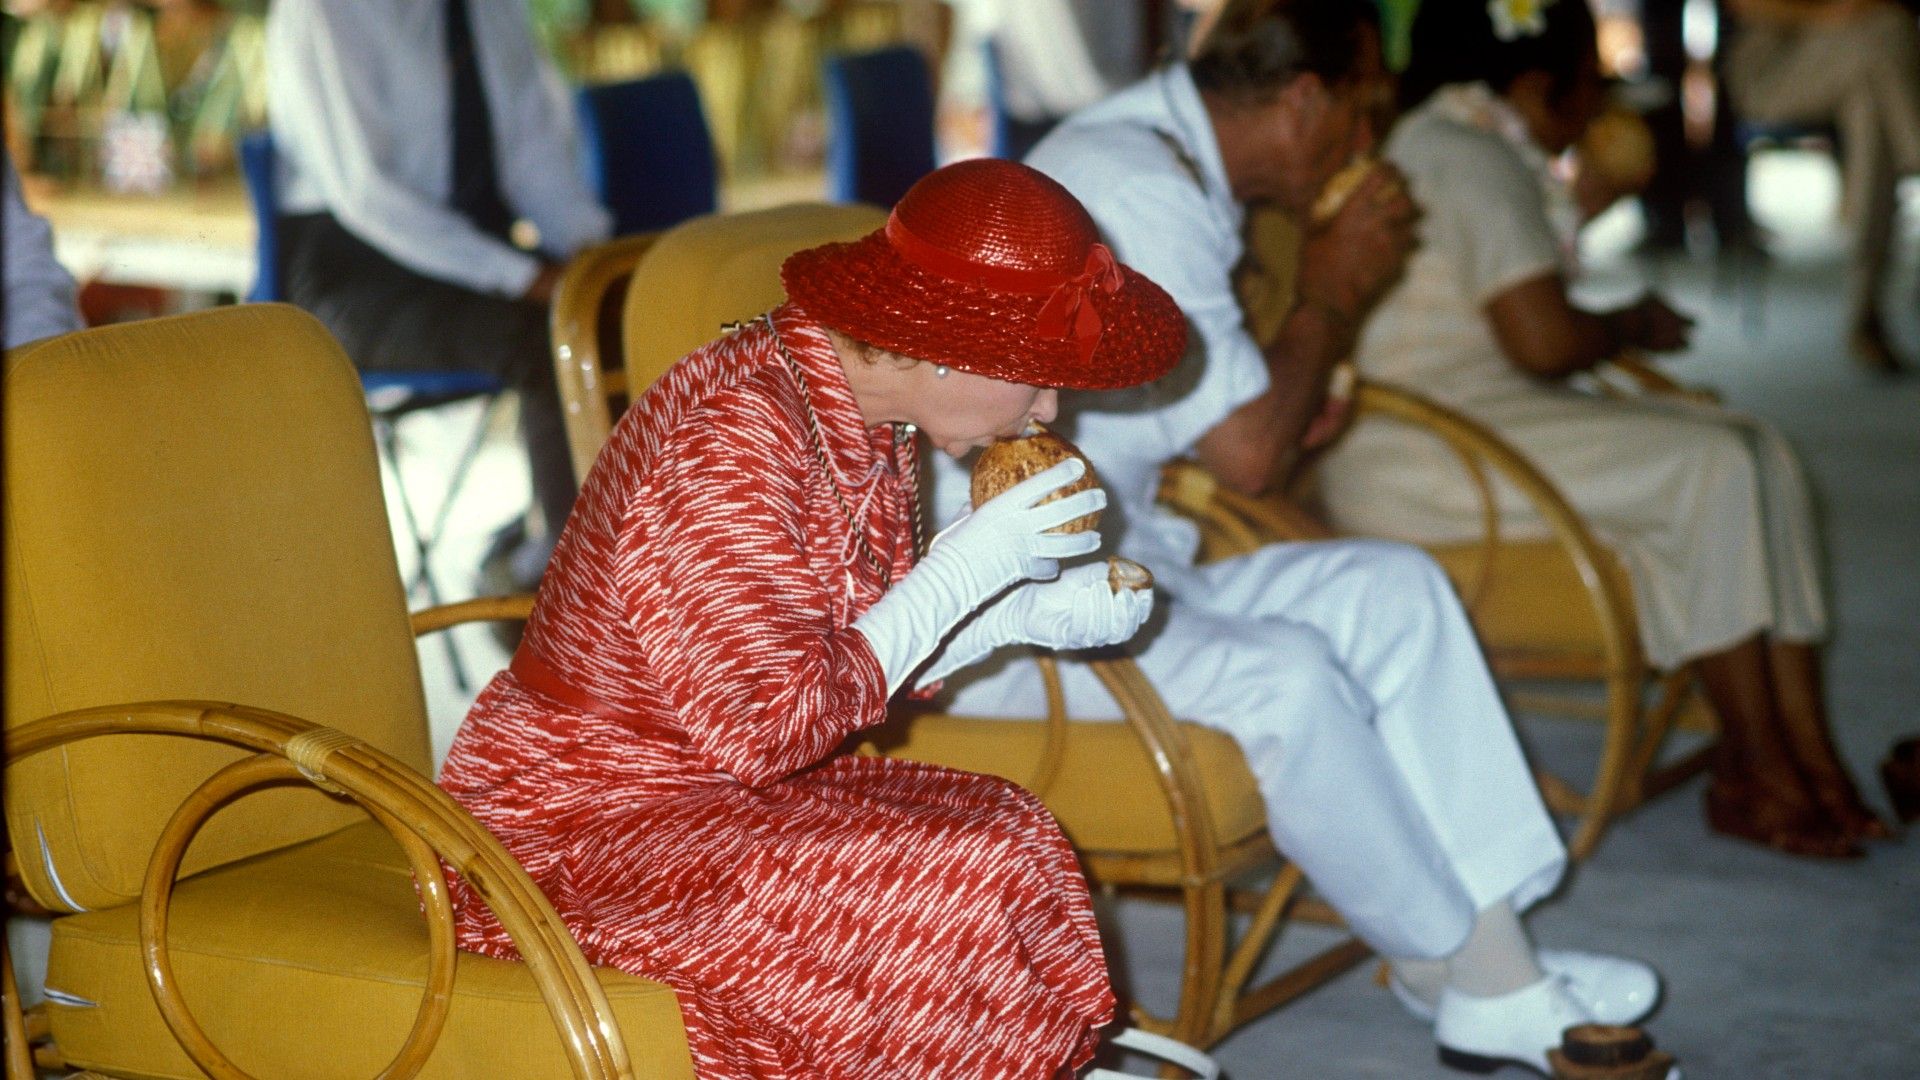 <p>                     Philip and Elizabeth made sure to get stuck into the local culture when they visited Kiribati in the South Pacific in 1982.                   </p>                                      <p>                     It was rare to ever see the Queen (or her husband) eat or drink anything while in view of the public on royal tours, so it was quite the moment to see the royal couple enjoy a sip from a coconut as part of their welcome ceremony in Tarawa, Kiribati. The couple enjoyed their drinks as they watched some traditional dancing from locals.                   </p>